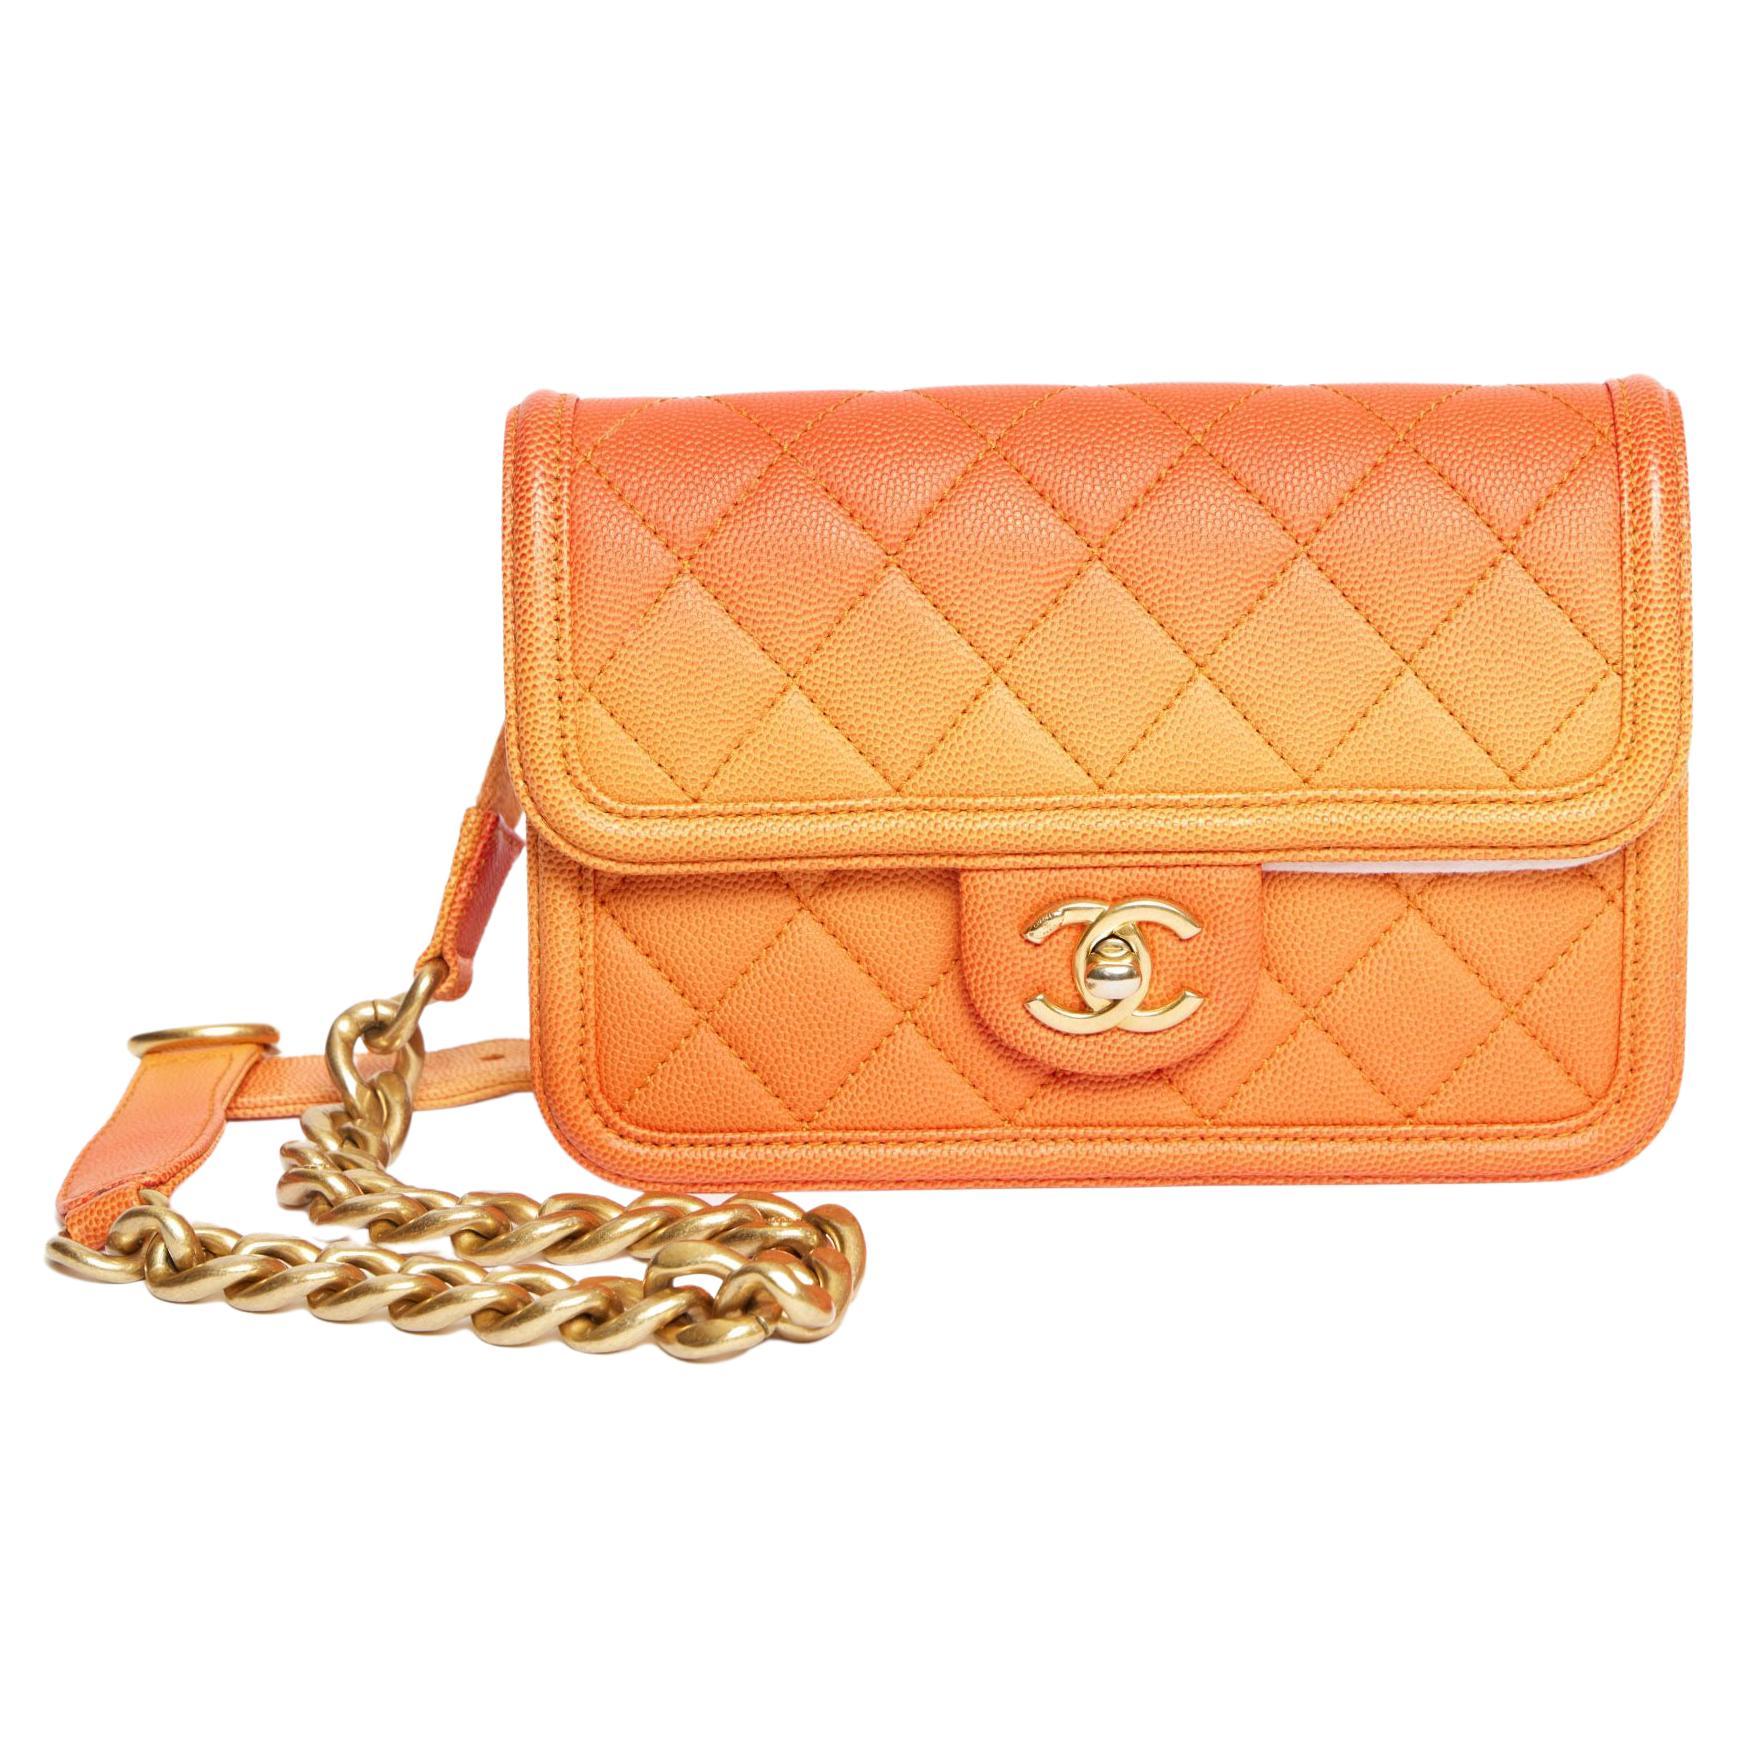 chanel limited edition bags